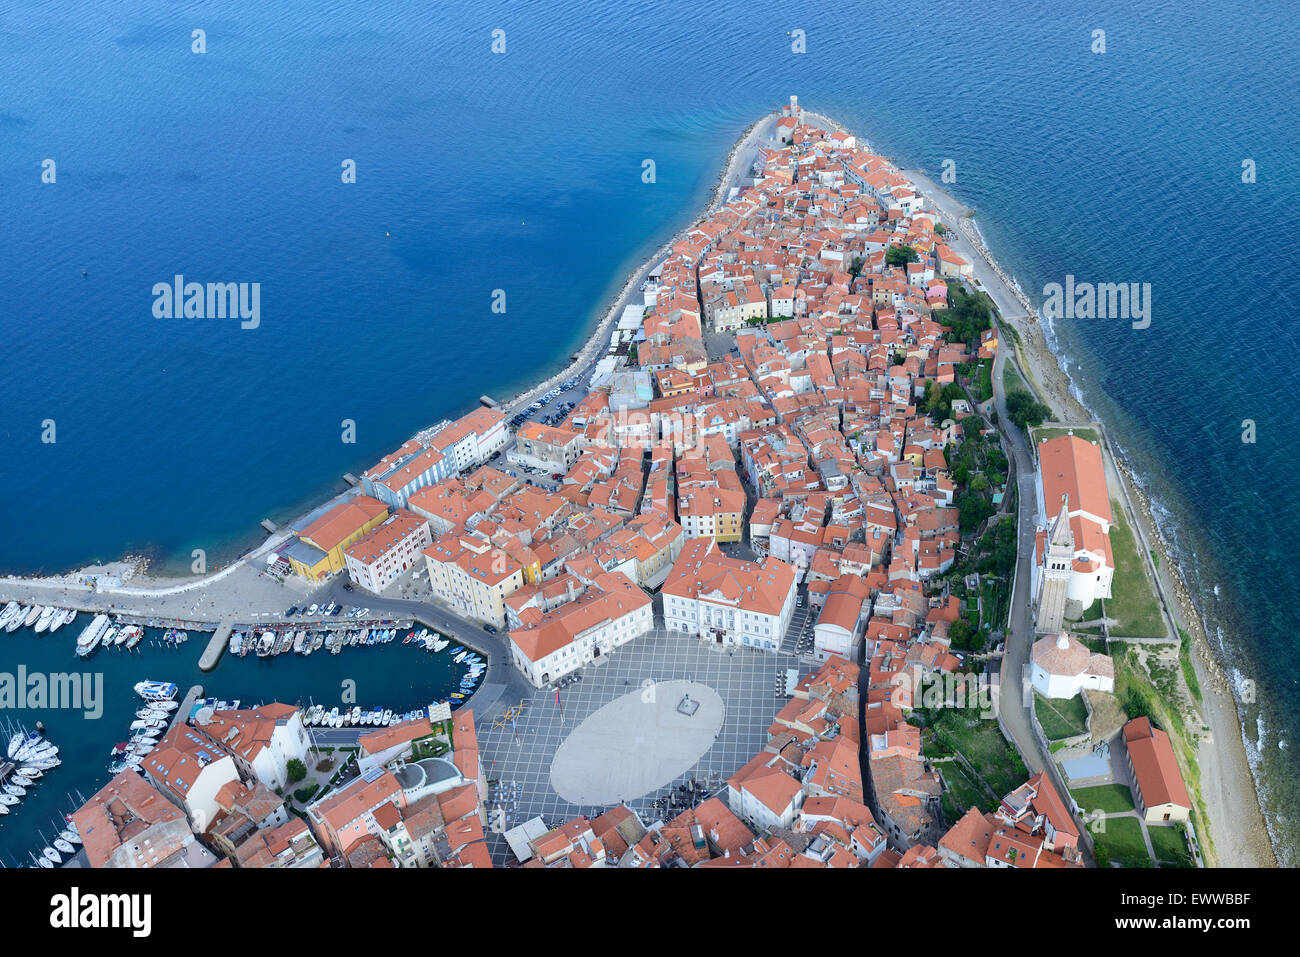 AERIAL VIEW. Medieval city jutting out into the Adriatic Sea. City of Piran (also known as Pirano, its Italian name), Slovenia. Stock Photo